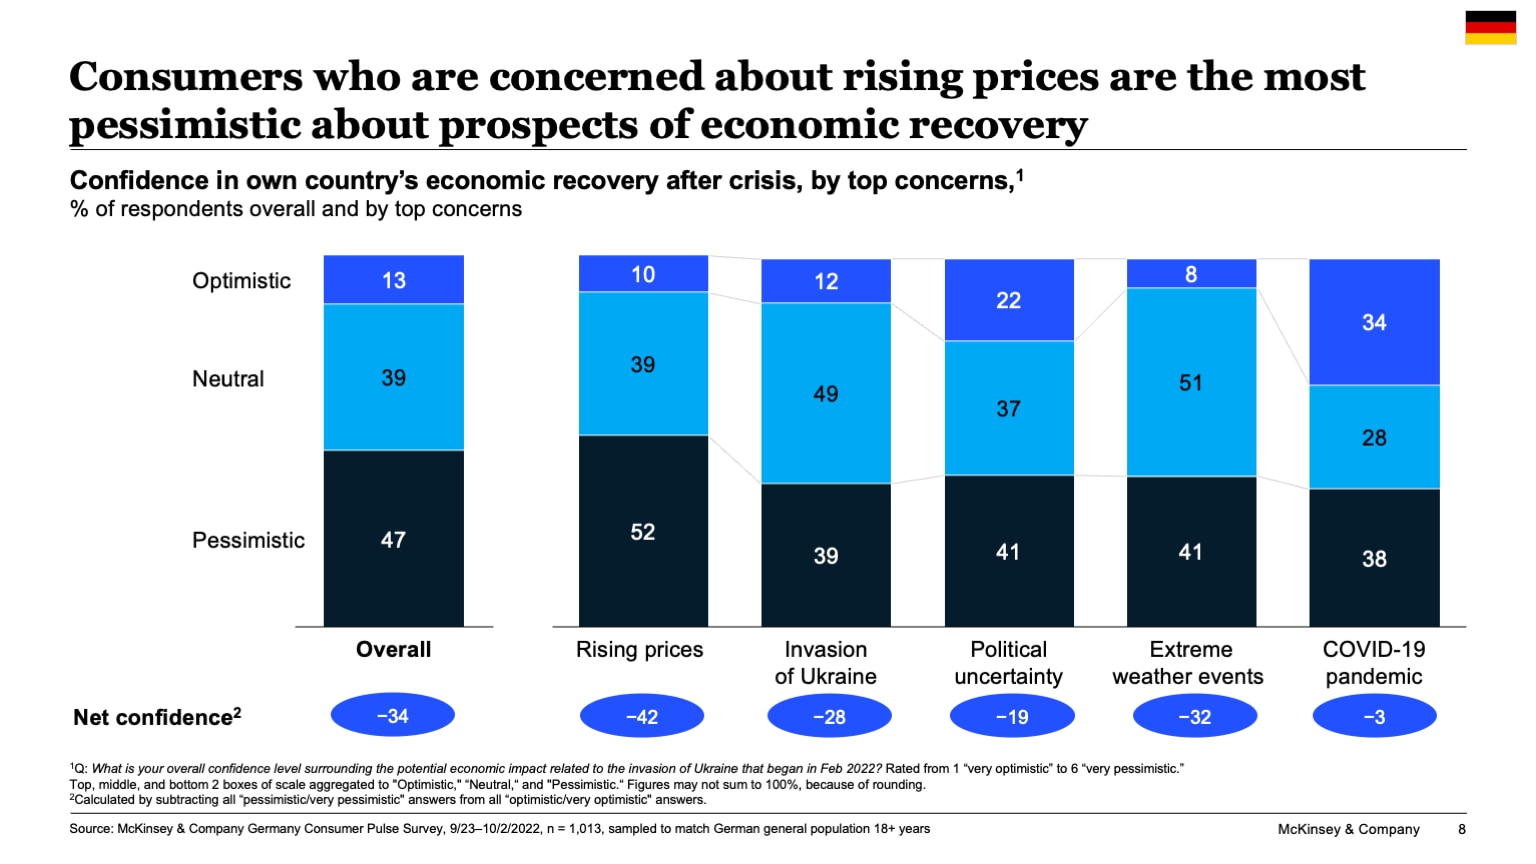 Consumers who are concerned about rising prices are the most pessimistic about prospects of economic recovery